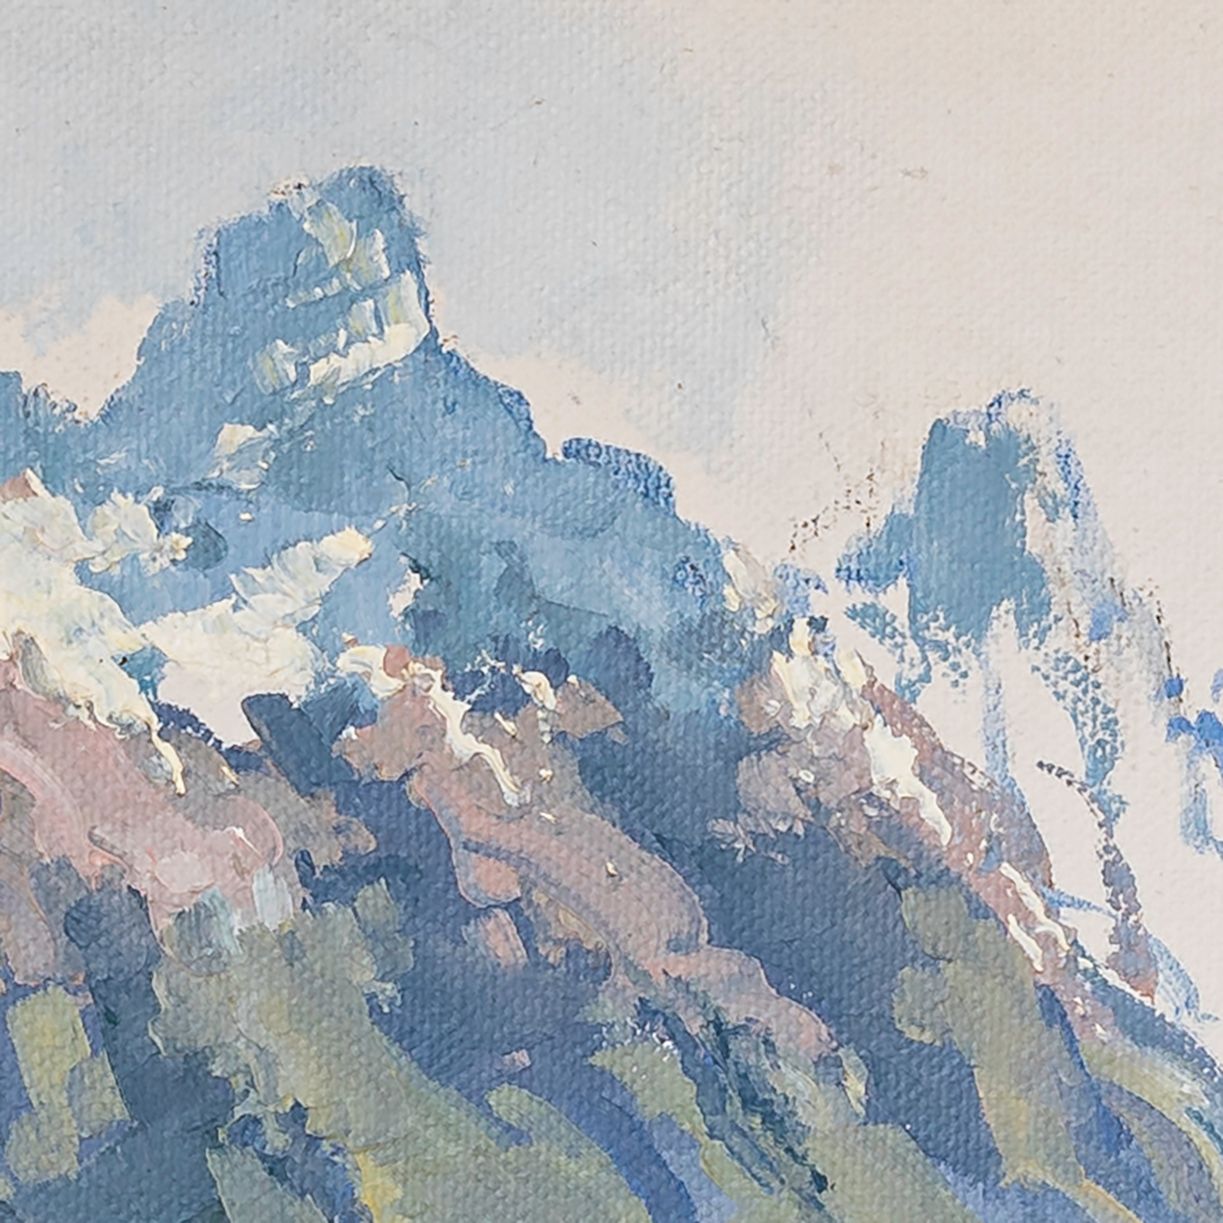 Partial detail of Oil Painting by renowned landscape artist Neil J Bartlett of Diamond Lake Glenorchy New Zealand Silver Fern Gallery